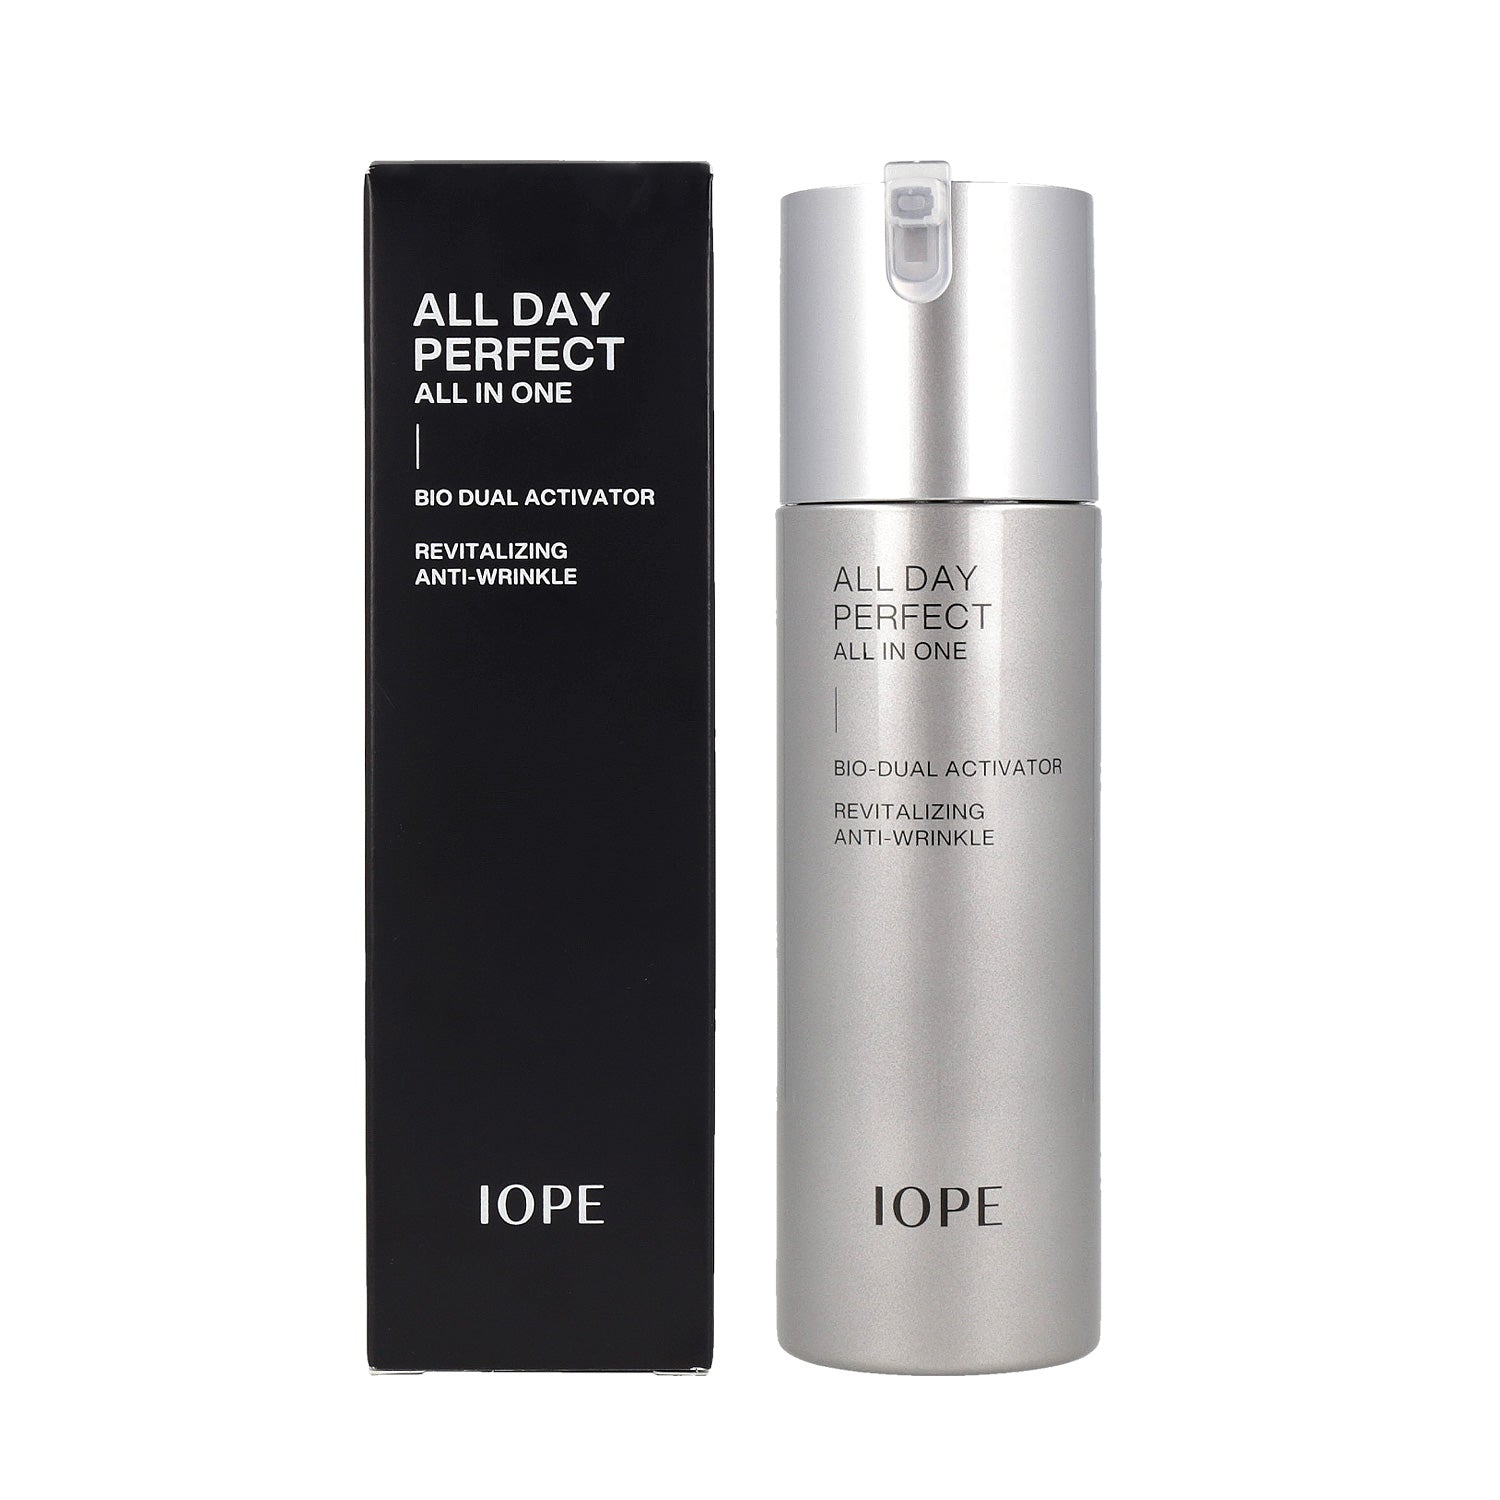 IOPE Men All Day Perfect All In One 120ml serum bottle with long-lasting hydration.